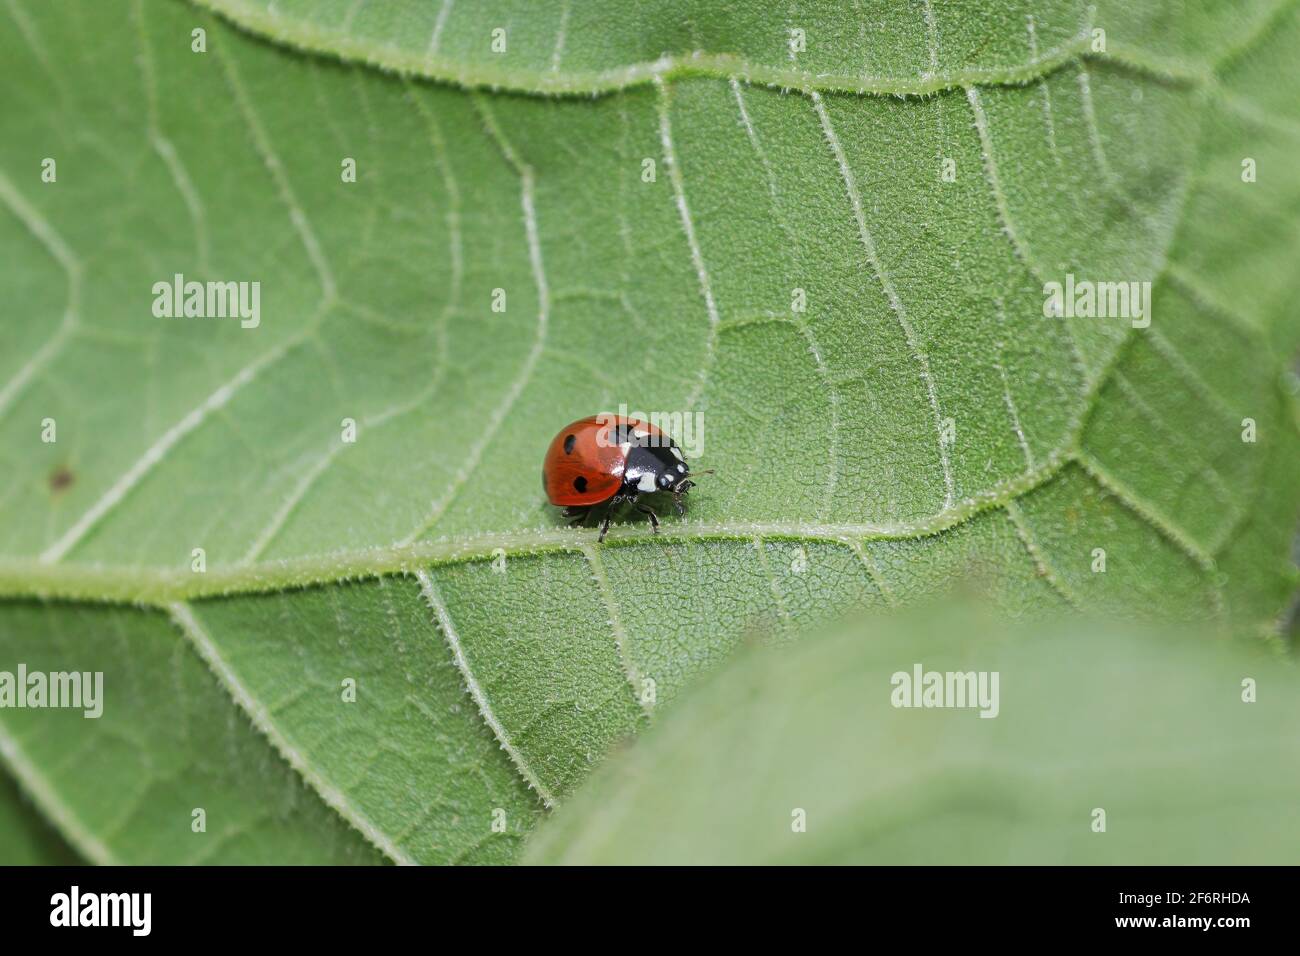 A ladybug crawling on the underside of a veined leaf Stock Photo